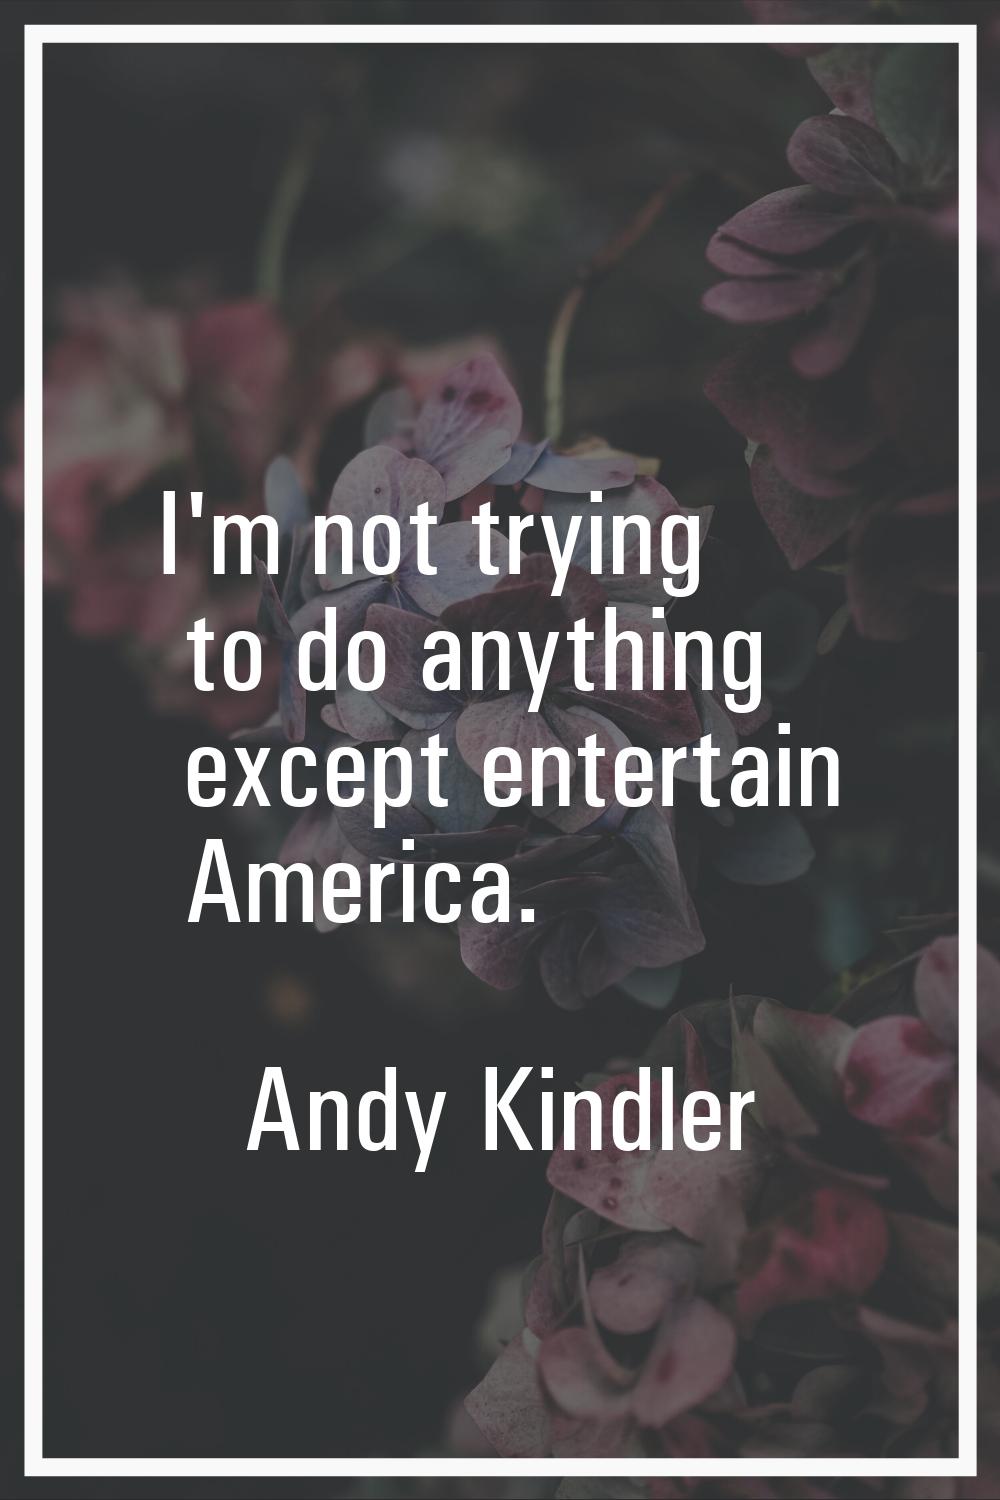 I'm not trying to do anything except entertain America.